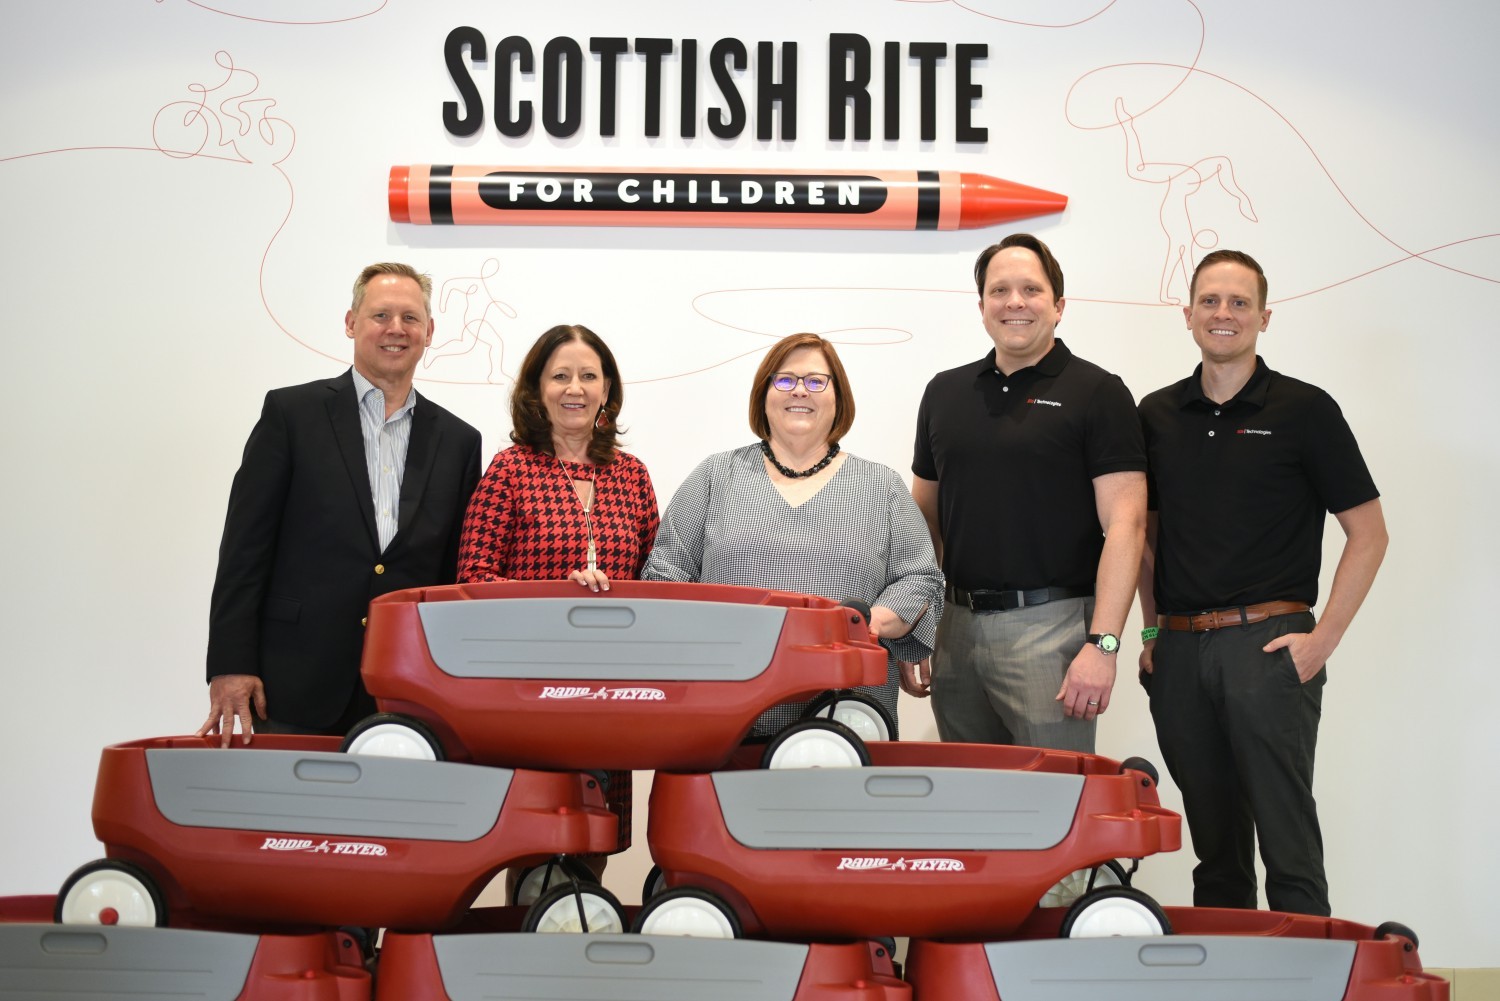 806 Technologies leadership presenting gift of wagons, blankets, and stuffed animals to Scottish Rite Spring of 2022. 